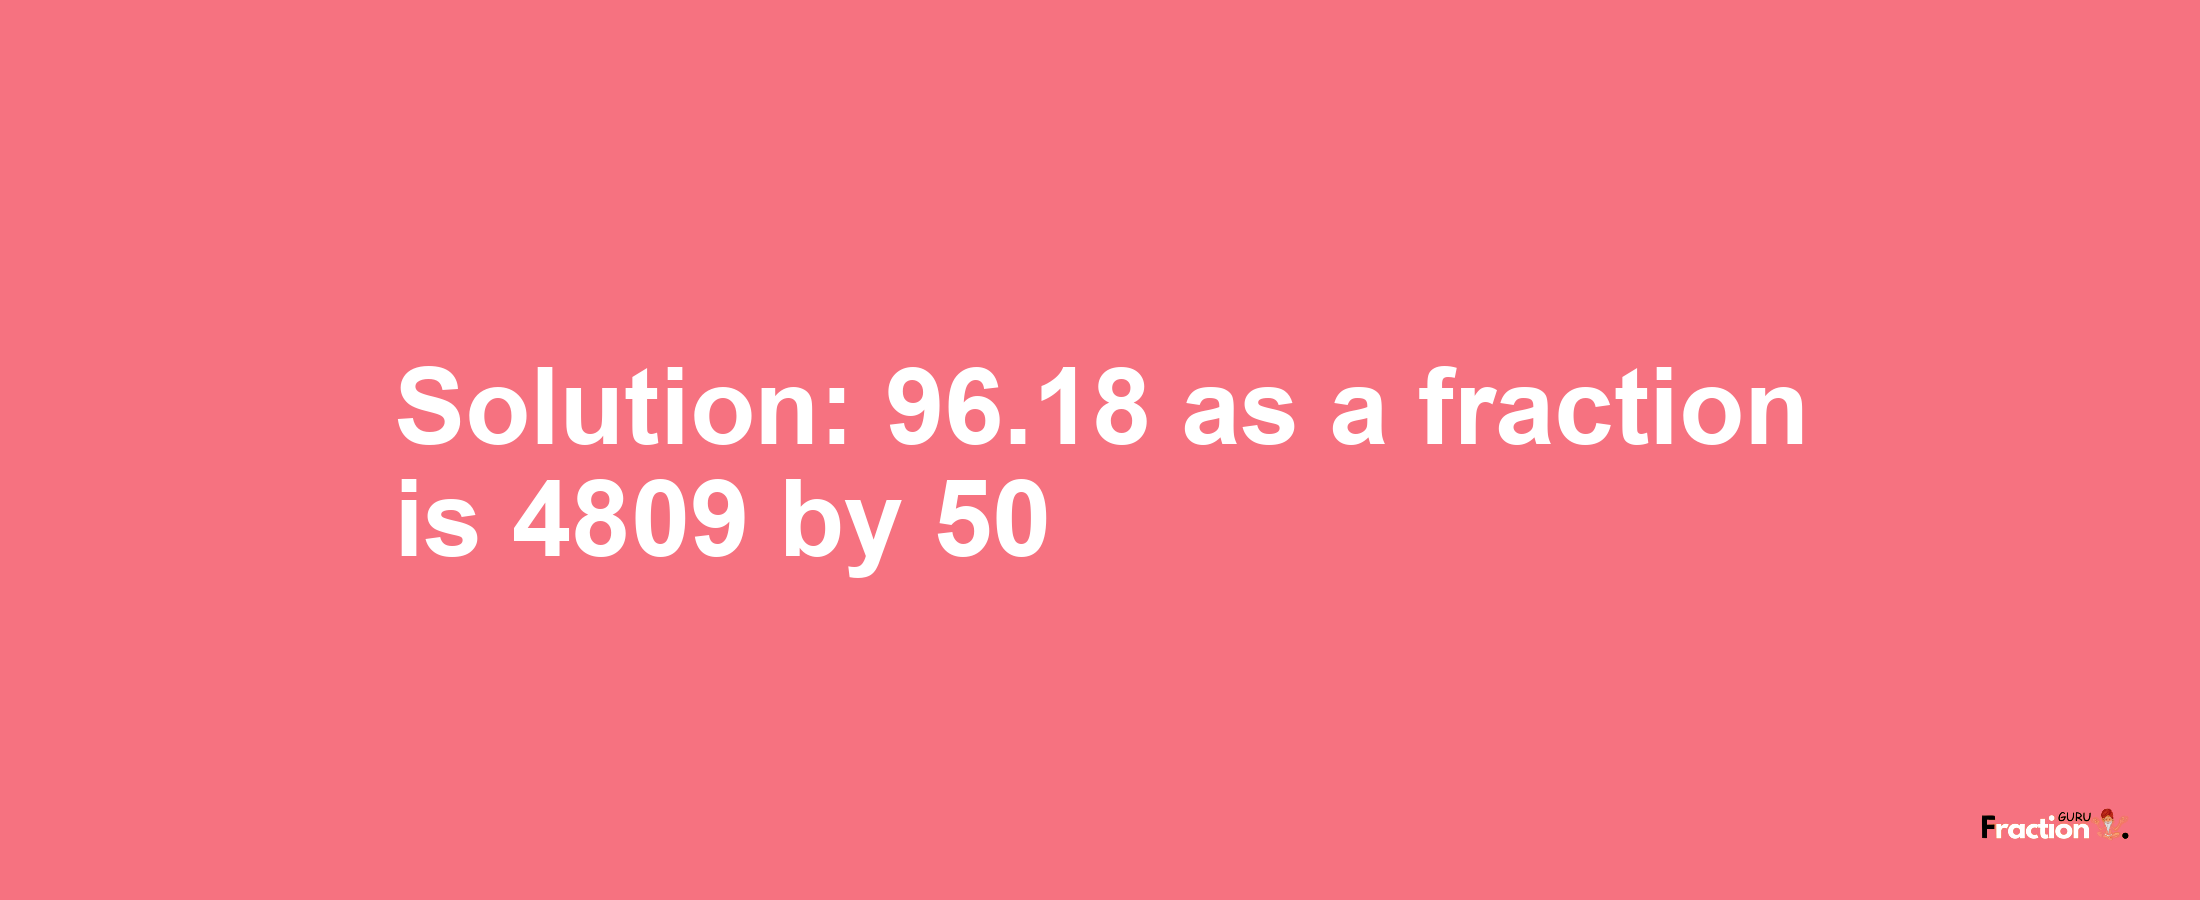 Solution:96.18 as a fraction is 4809/50